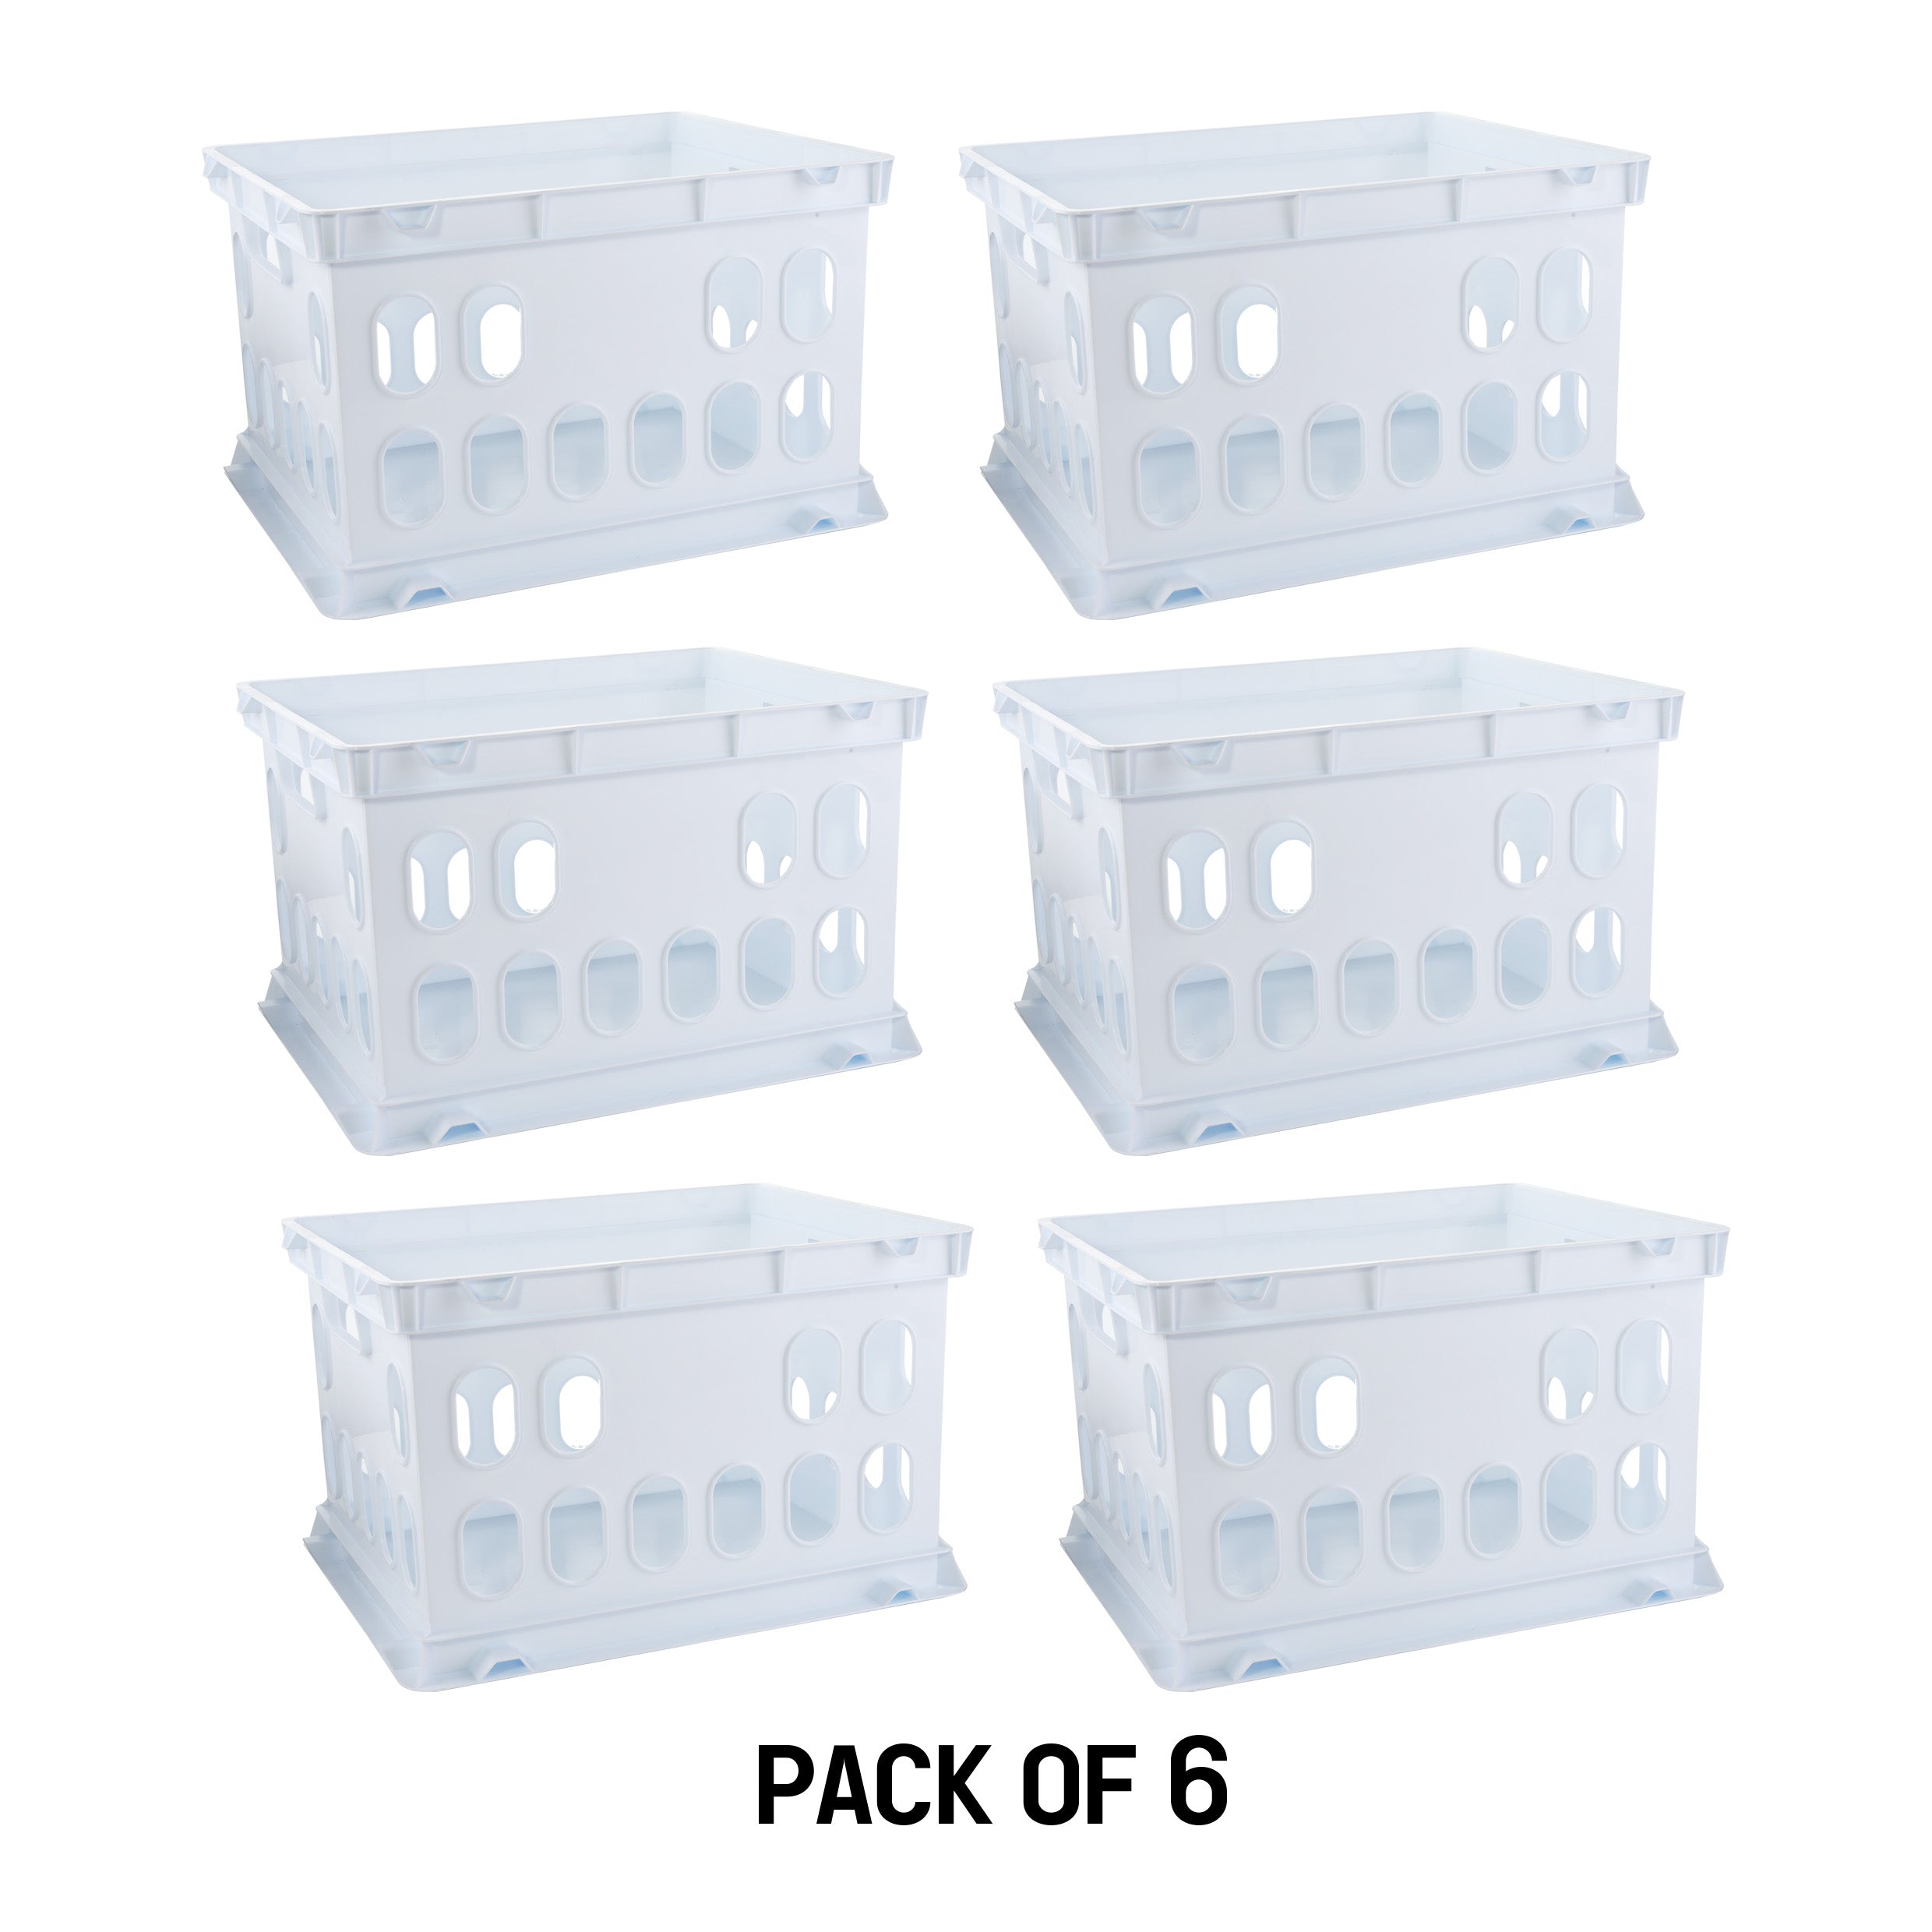 American Maid Crate Small, Pack of 6